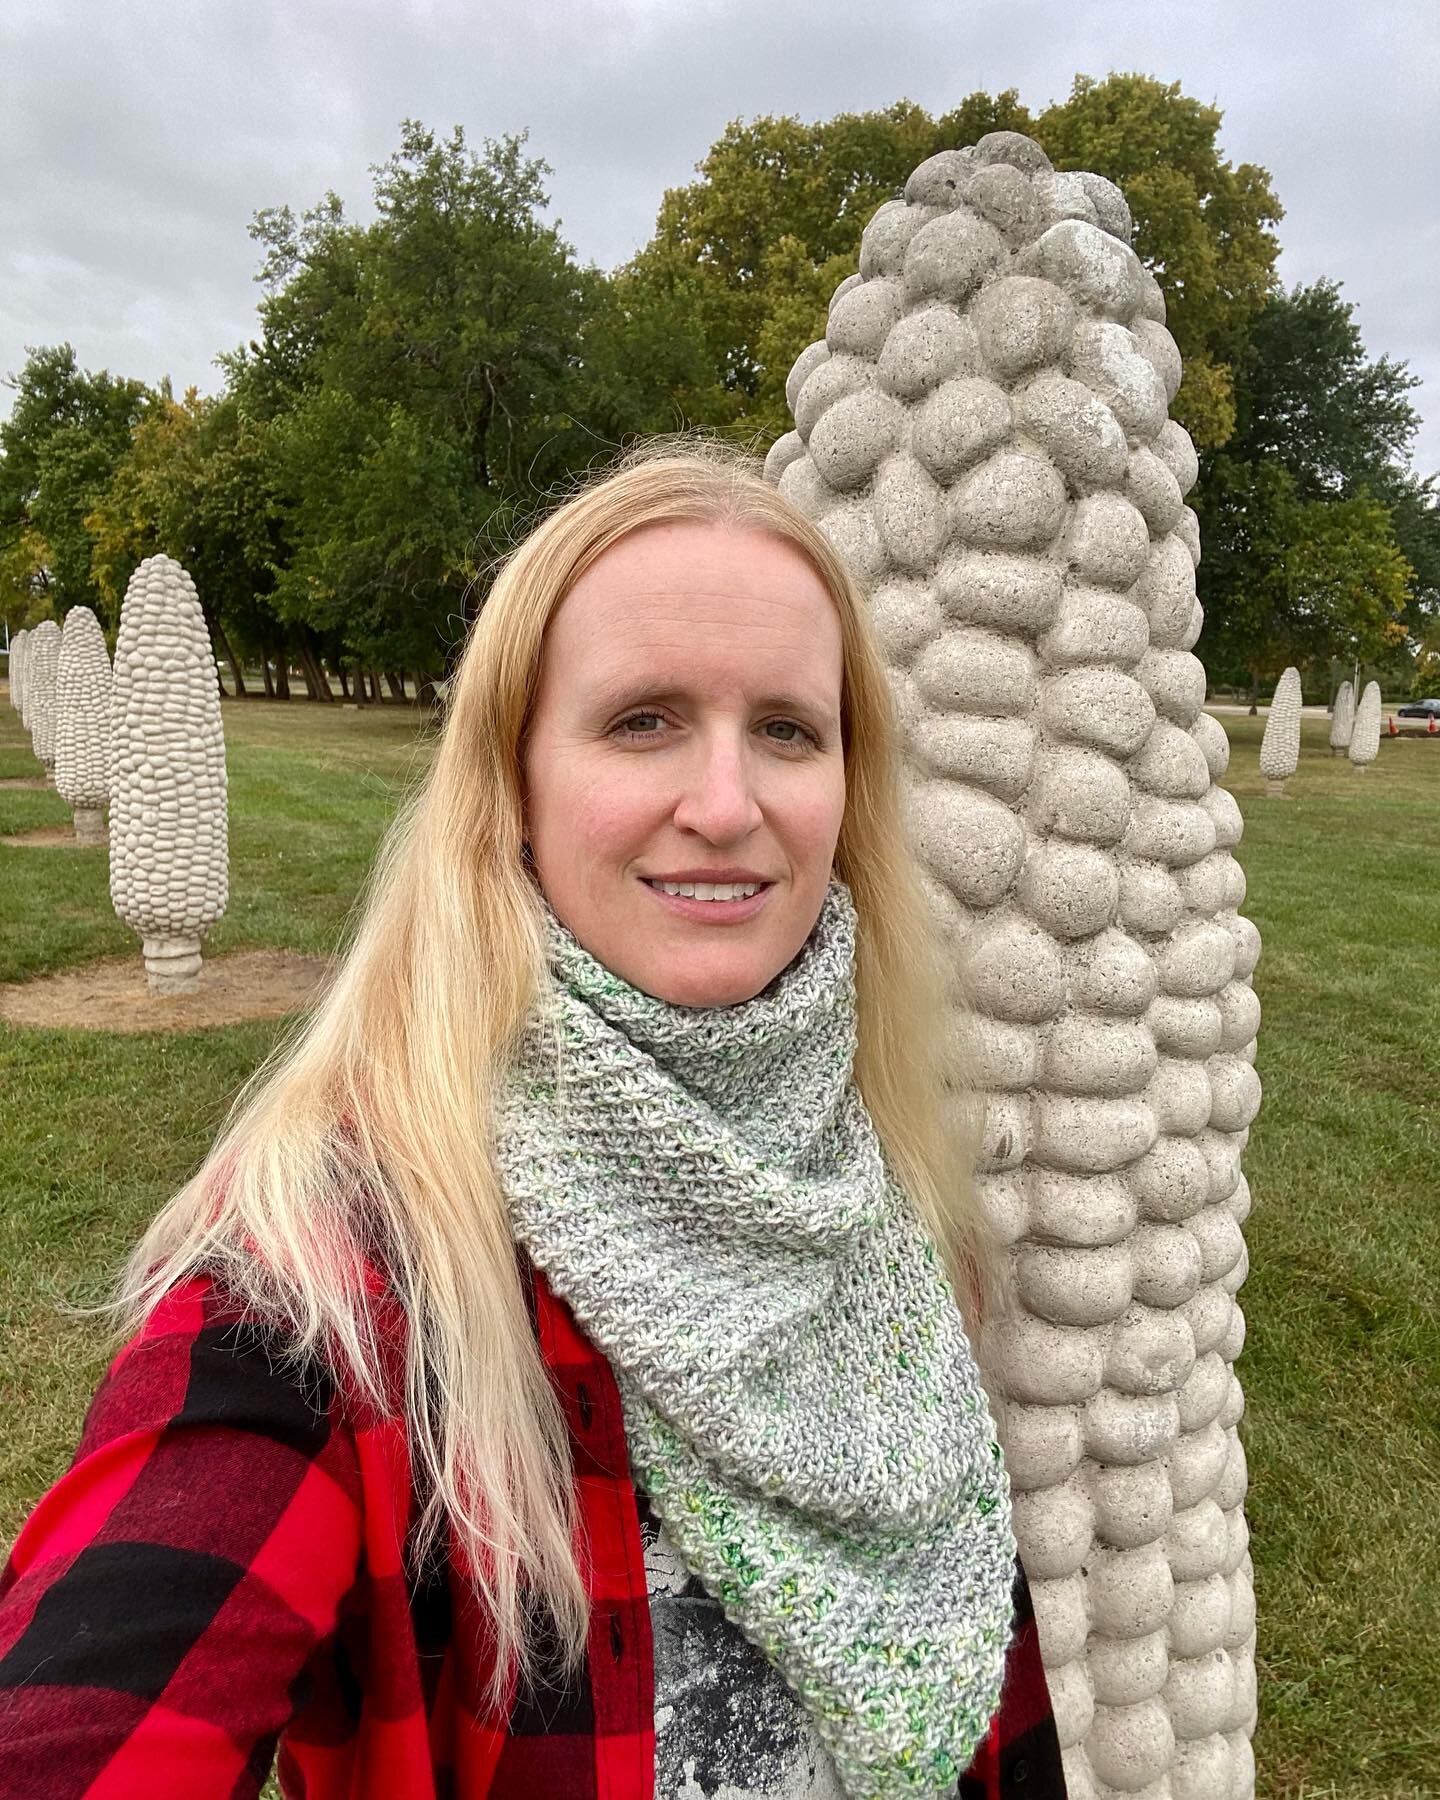 🧶New Pattern Alert! The Cornhenge Cowl is now available in my Ravelry store as well as on my website. Both links are in my profile.

Did you know there is a place in Ohio called Field of Corn? 🌽 Yep, its a thing! It is more commonly known as Cornhe